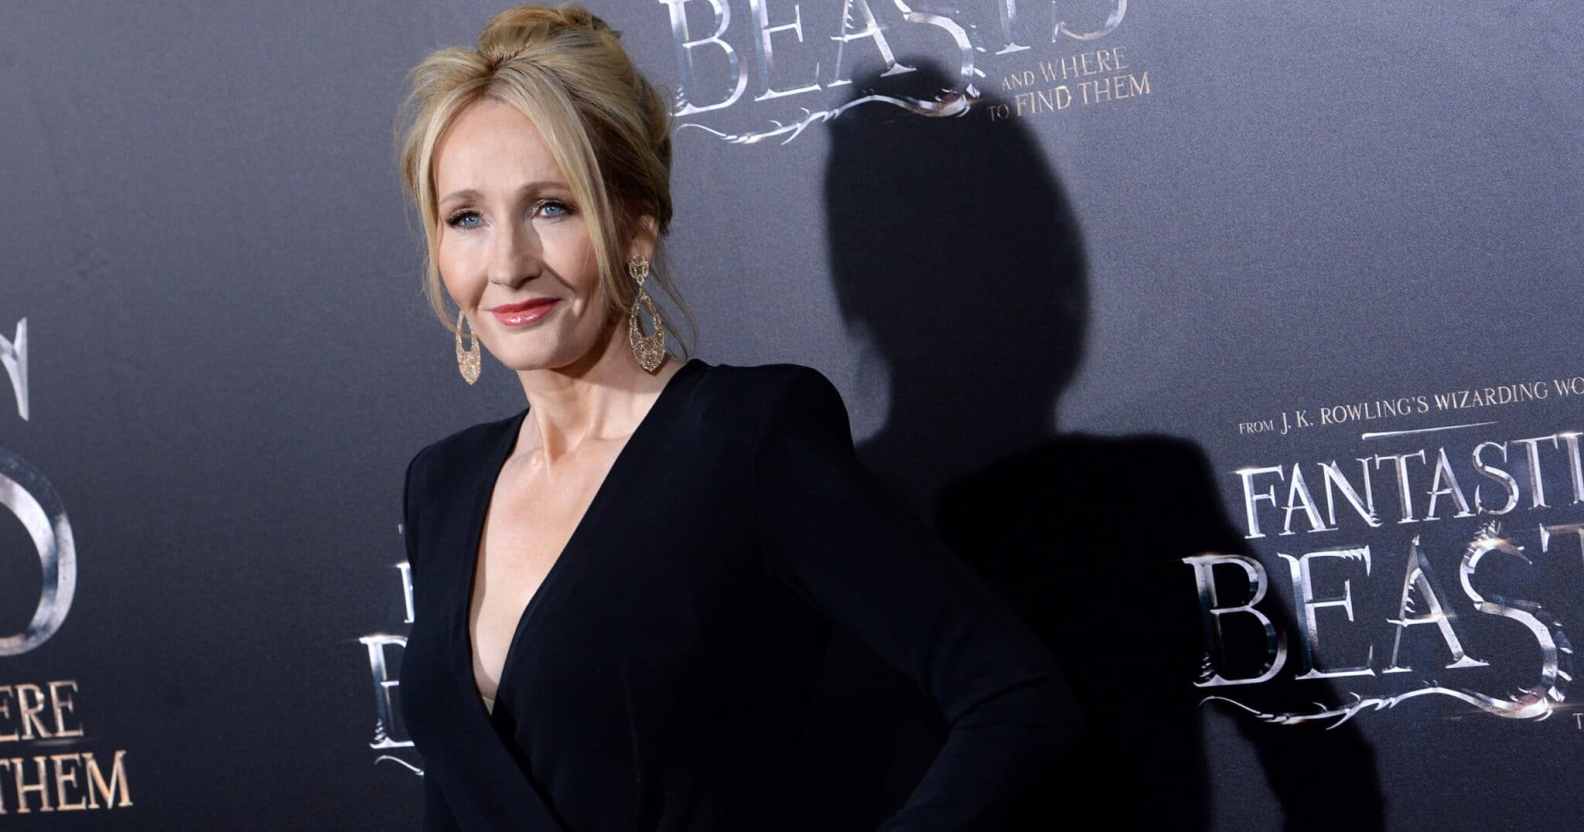 JK Rowling attends the Fantastic Beasts And Where To Find Them world premiere in 2016